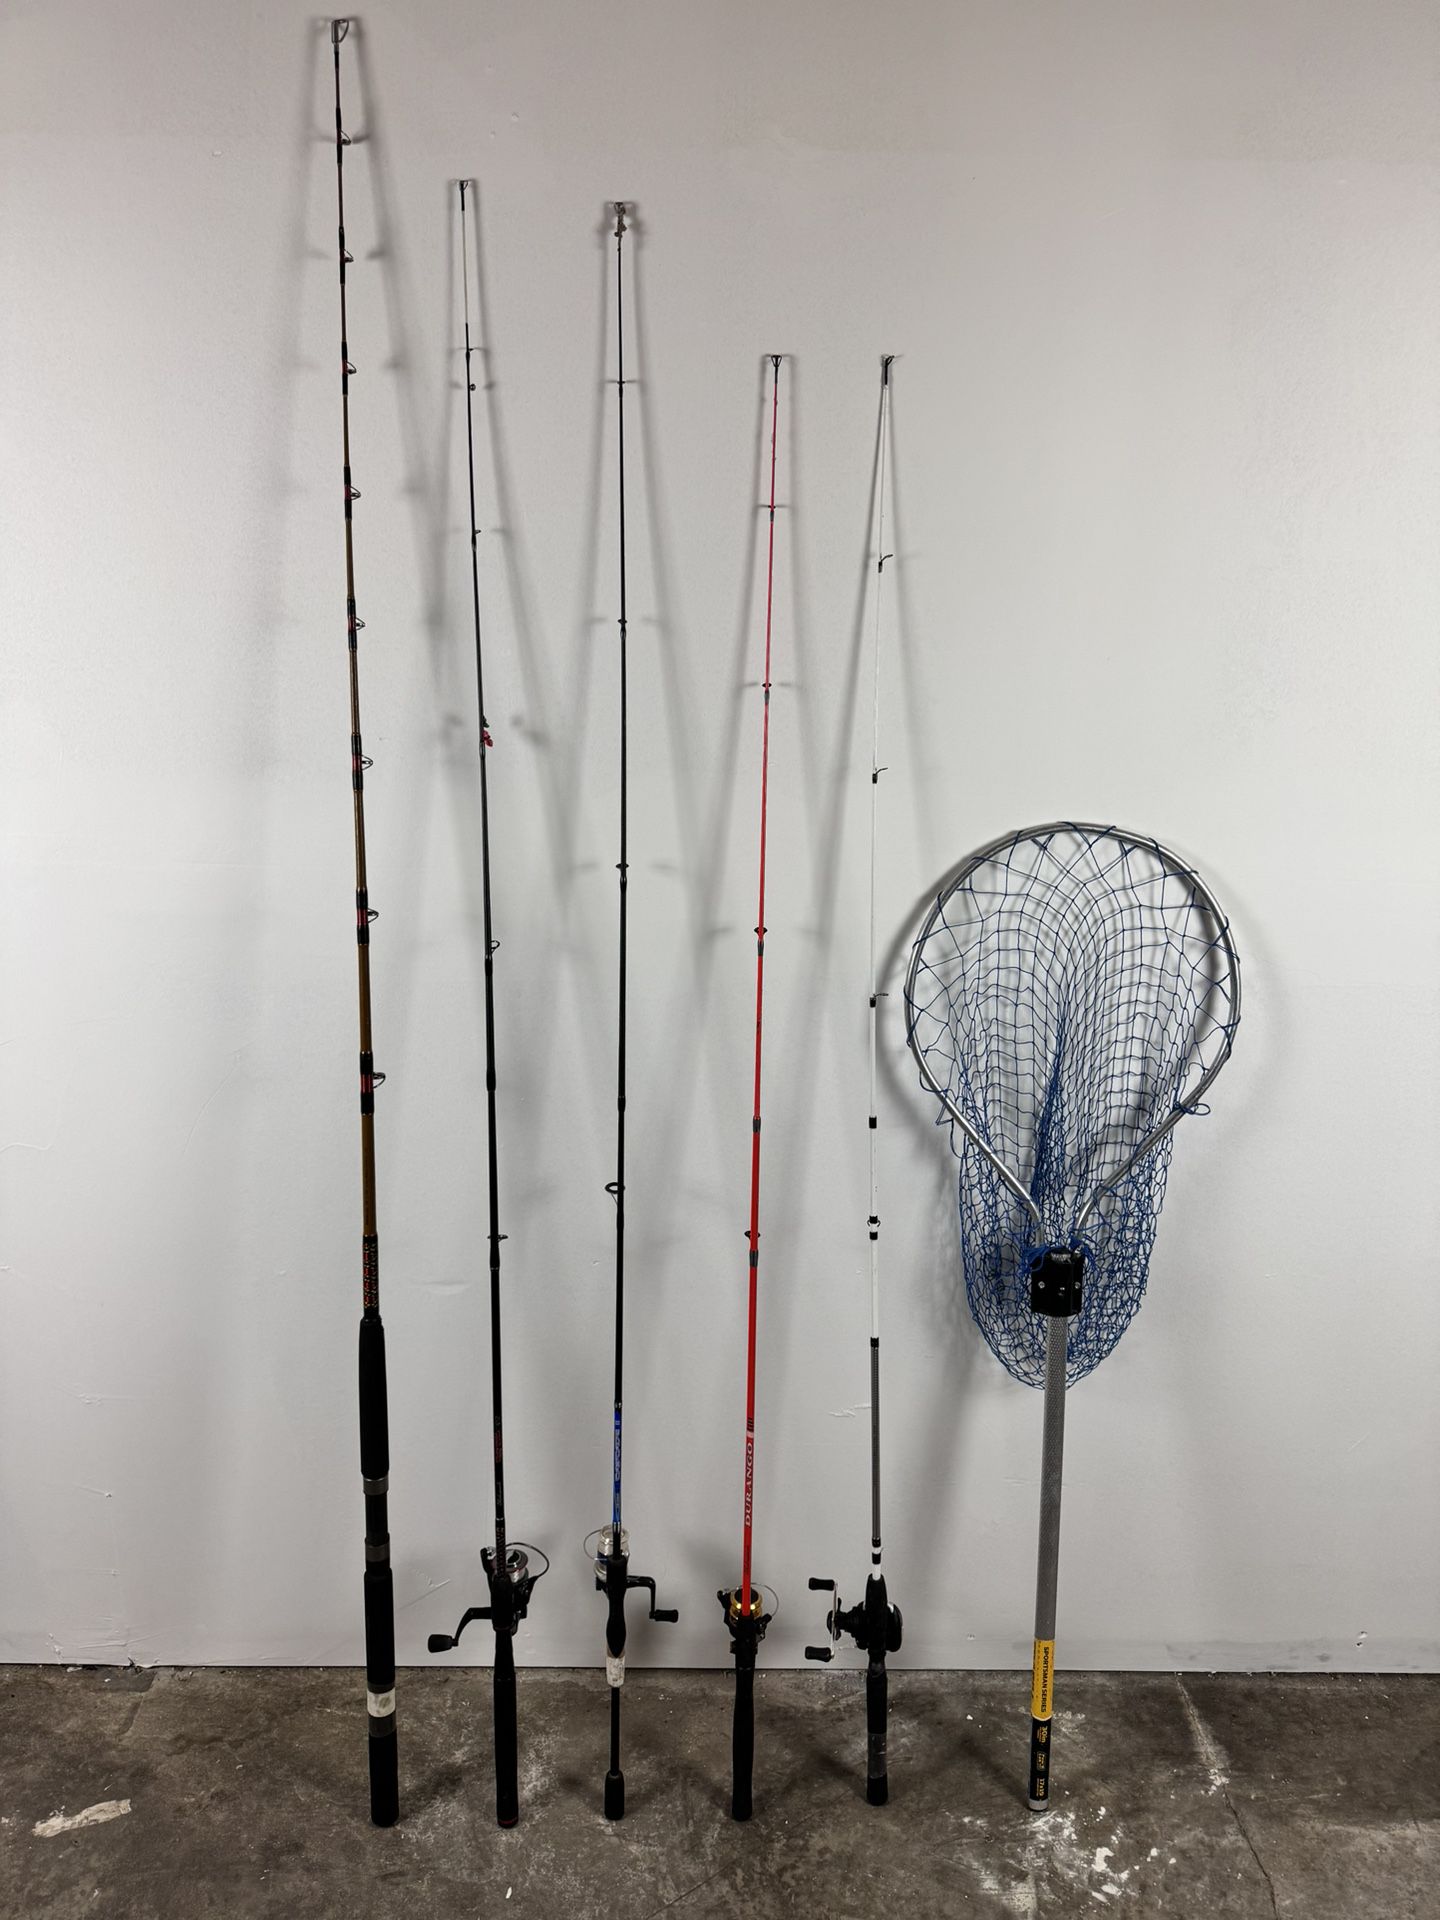 A good set of different fishing rods